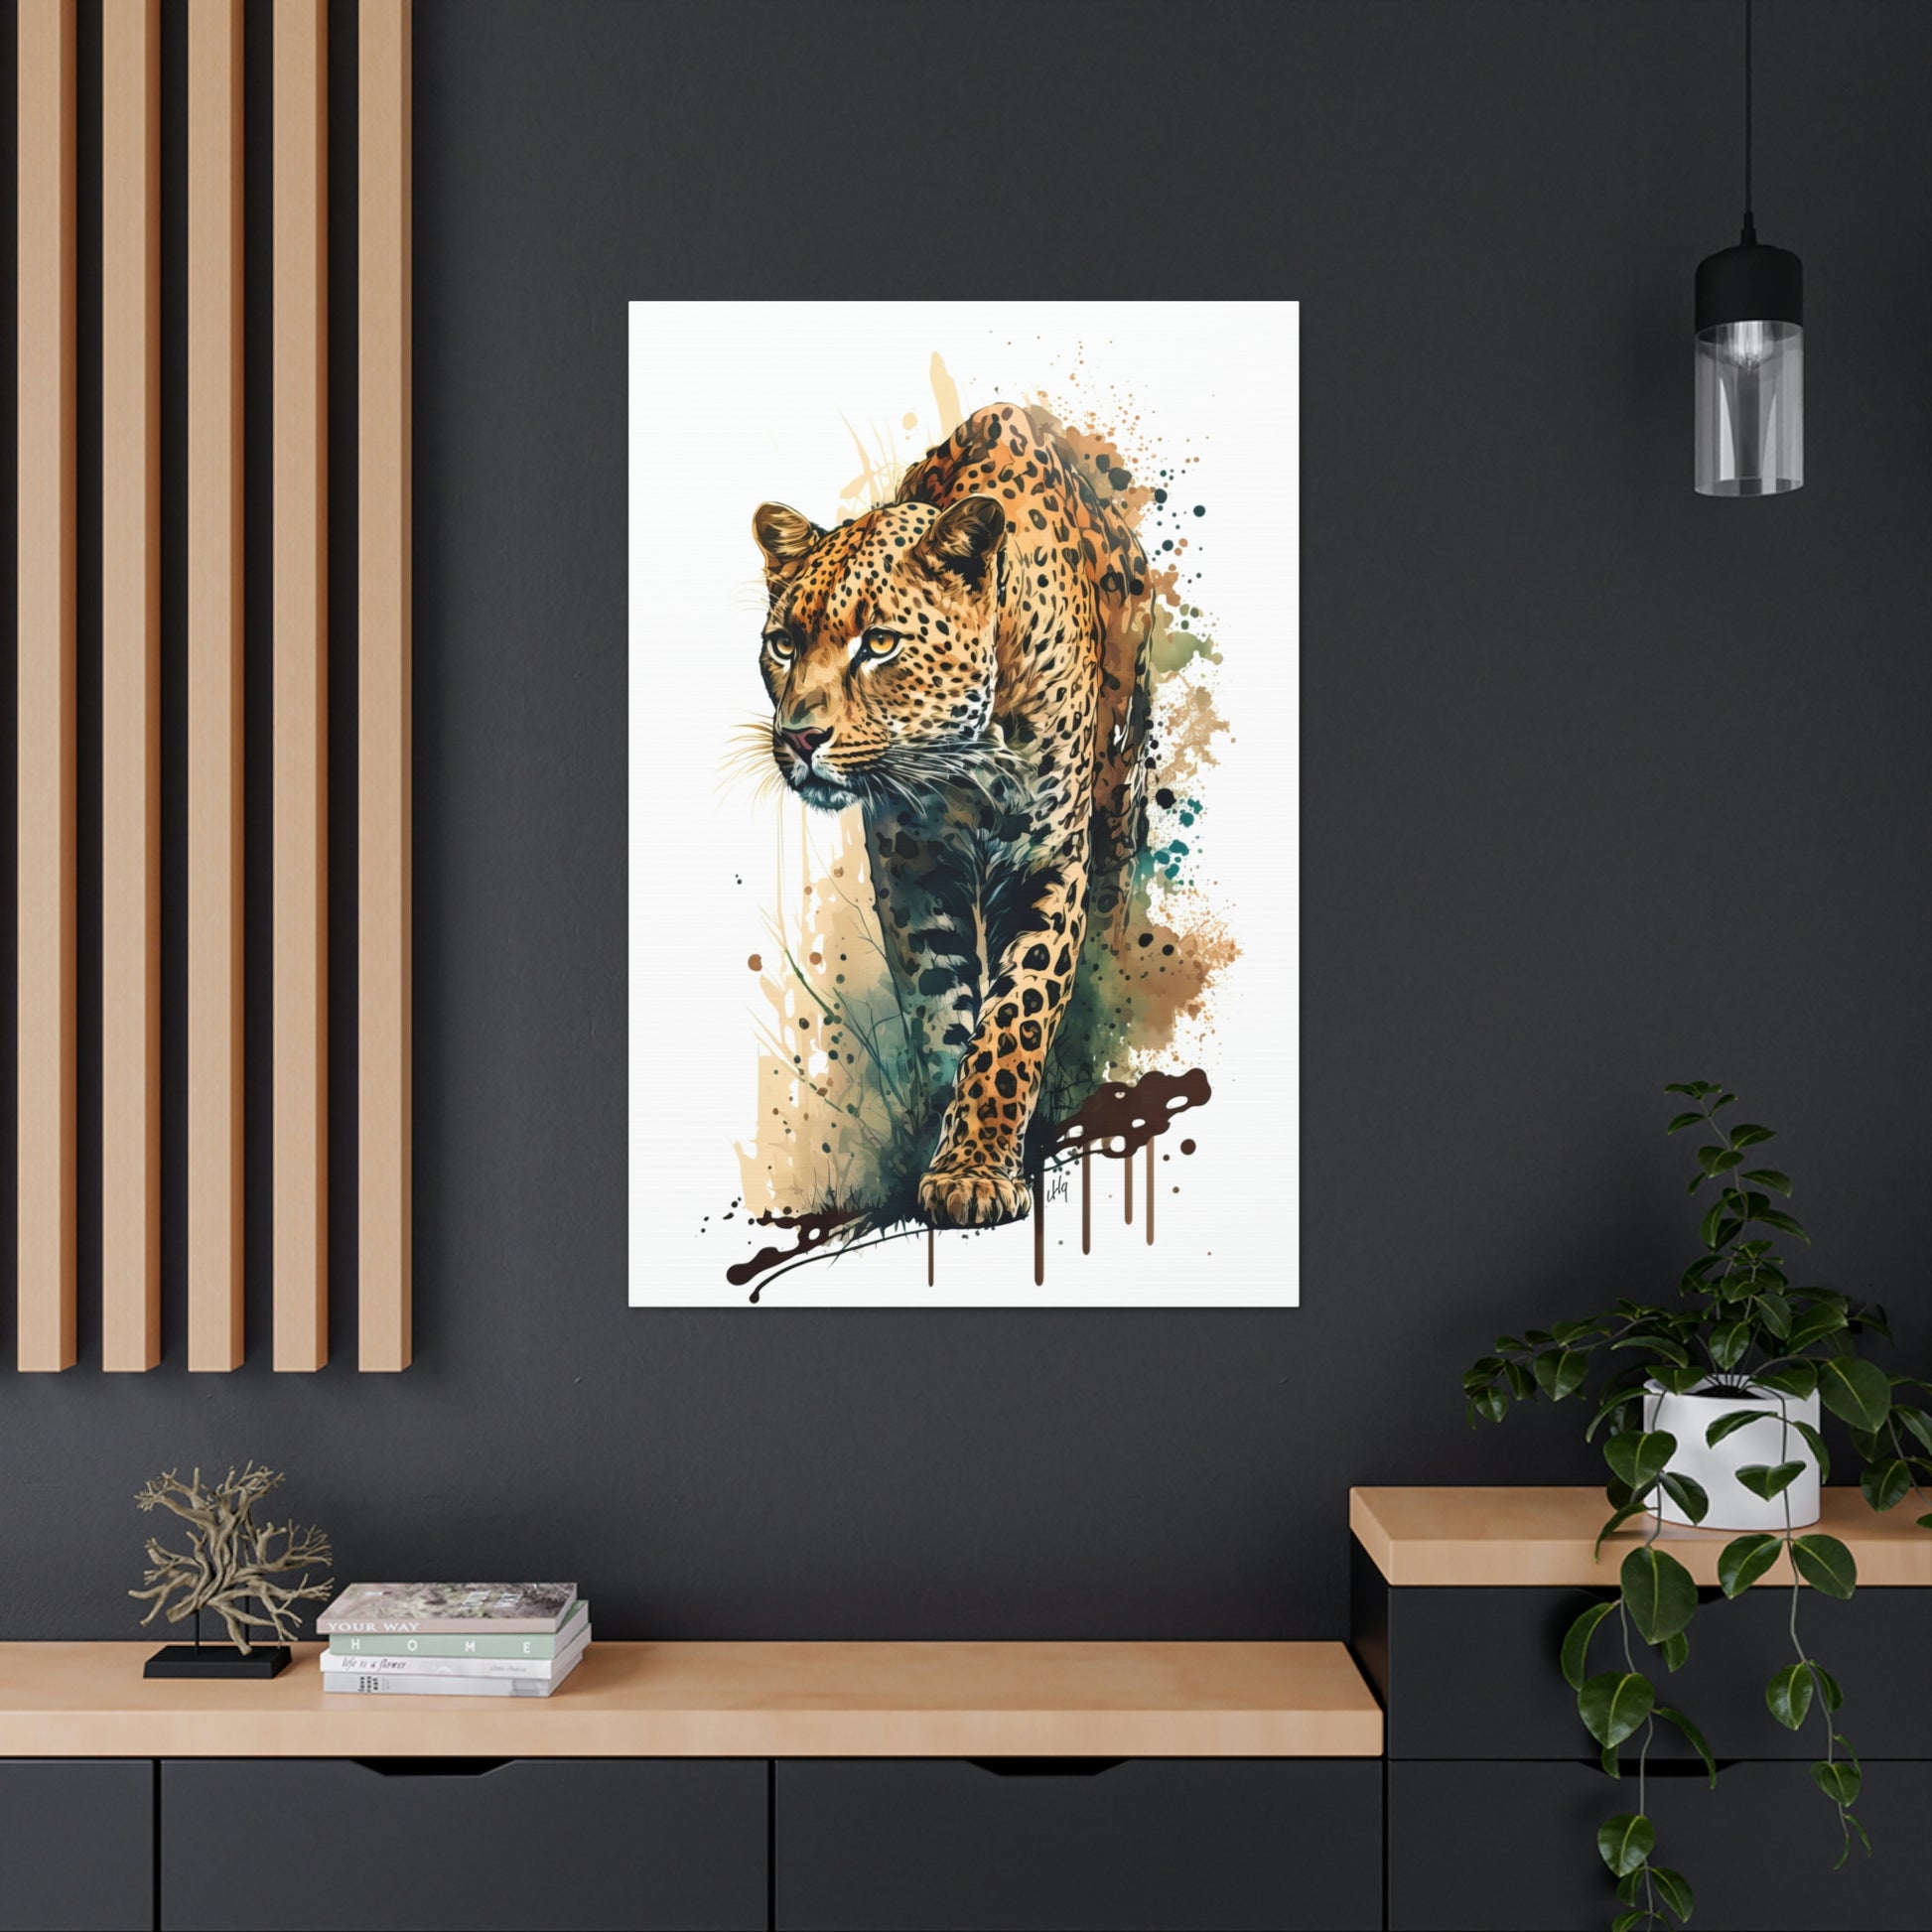 Leopard Wall Art from the Wildlife Collection, a stunning visual on canvas that captures the sleek elegance and stealth of this big cat. Ideal for enthusiasts of exquisite wall art, nature-inspired gallery settings, vibrant canvas depictions, and a blend of wilderness and contemporary home decor elegance.